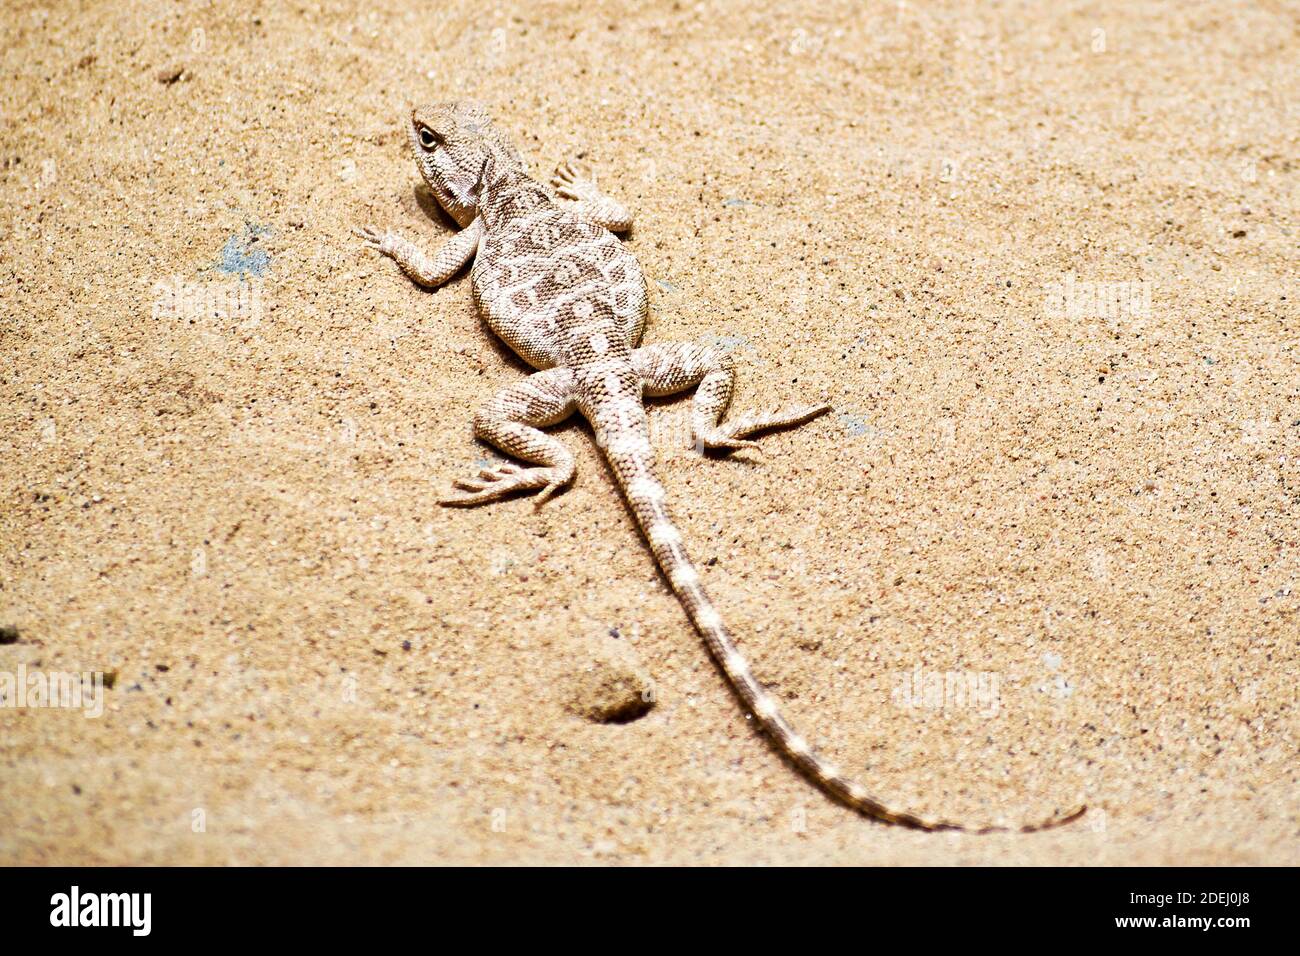 Small lizard crawling in the sand and hiding into the hole. Animals in the wild. Nature background textures Stock Photo